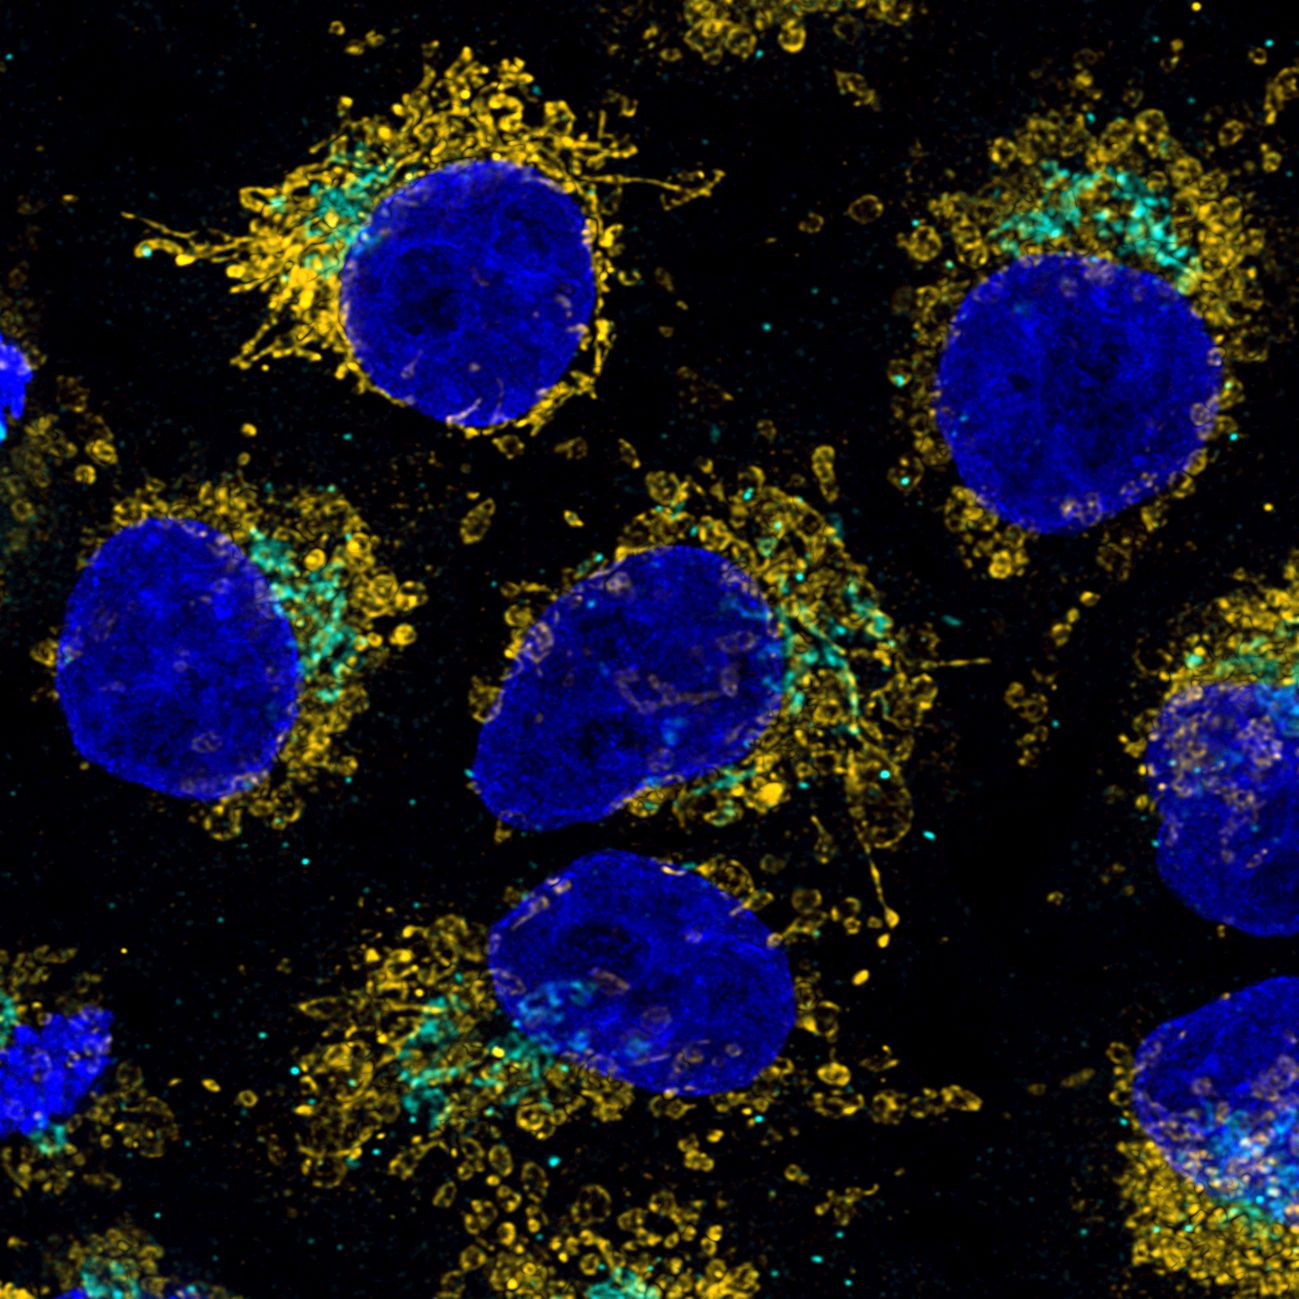 Immunofluorescence of HeLa: PFA-fixed HeLa cells were stained with anti-HSP60 (66041-1-Ig) labeled with FlexAble CoraLite® Plus 555 Kit (KFA022, yellow), anti-GORASP2 (66627-1-Ig) labeled with FlexAble CoraLite® Plus 647 Kit (KFA023, cyan) and DAPI (blue). ​Confocal images were acquired with a 100x oil objective and post-processed. Images were recorded at the Core Facility Bioimaging at the Biomedical Center, LMU Munich.